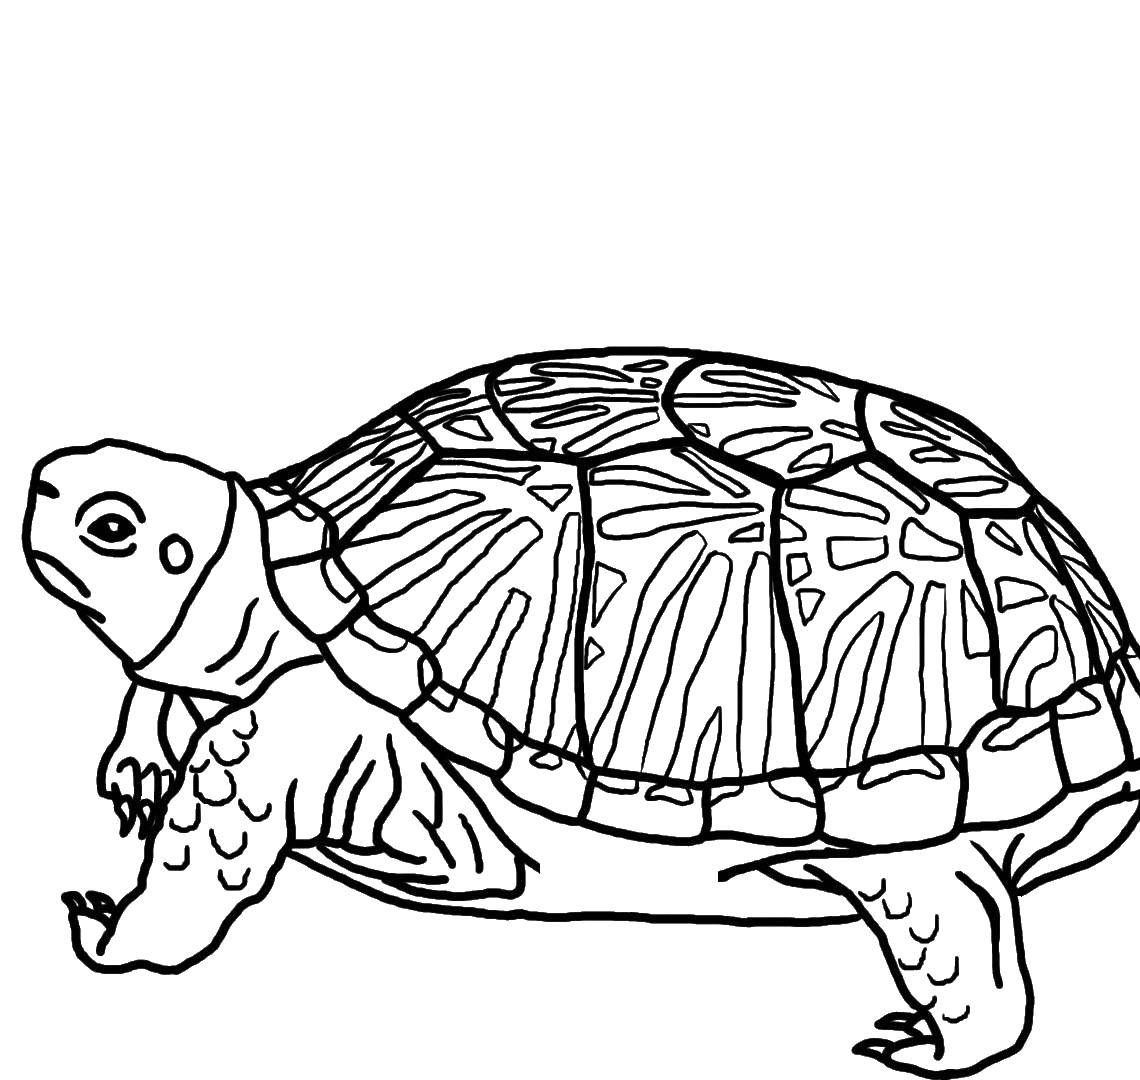 Coloring Bug. Category Animals. Tags:  animals, turtle, shell.